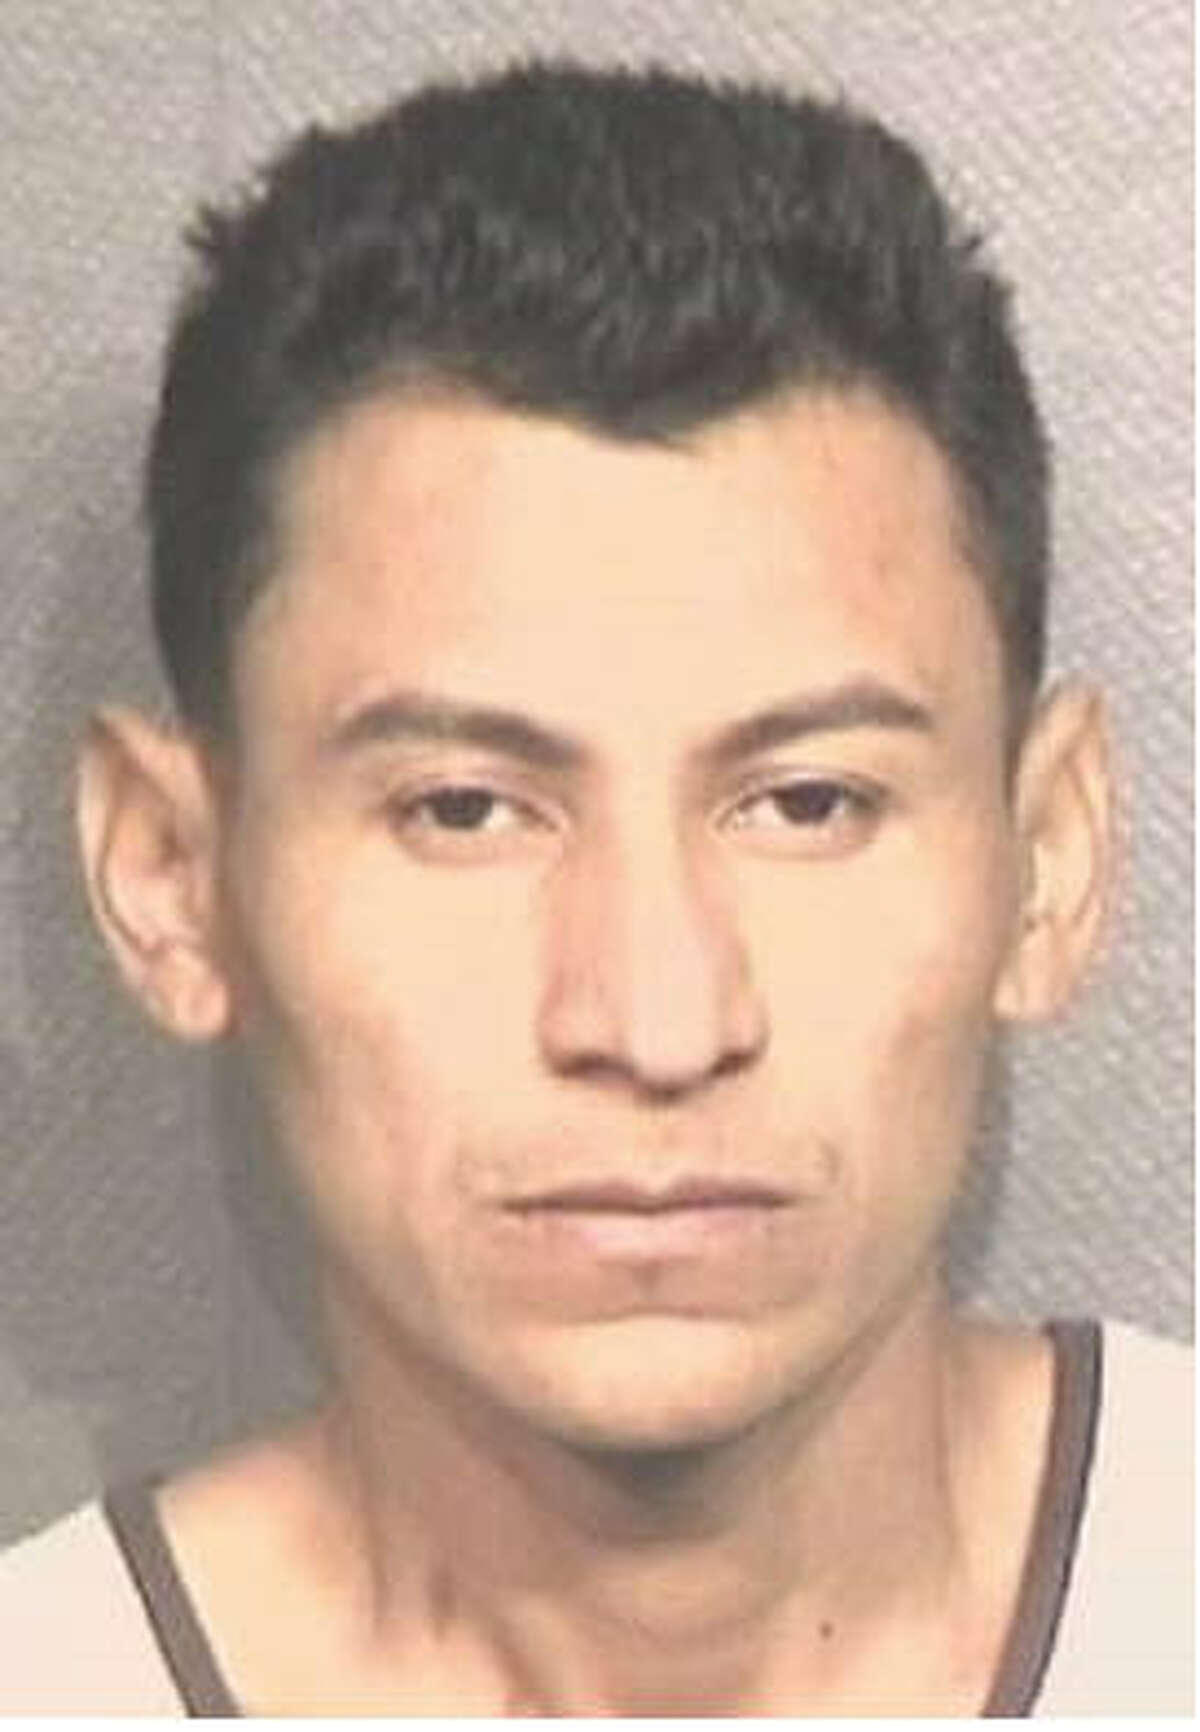 Miguel Aguilar-Ochoa was arrested in connection with the killing of an MS-13 informant.